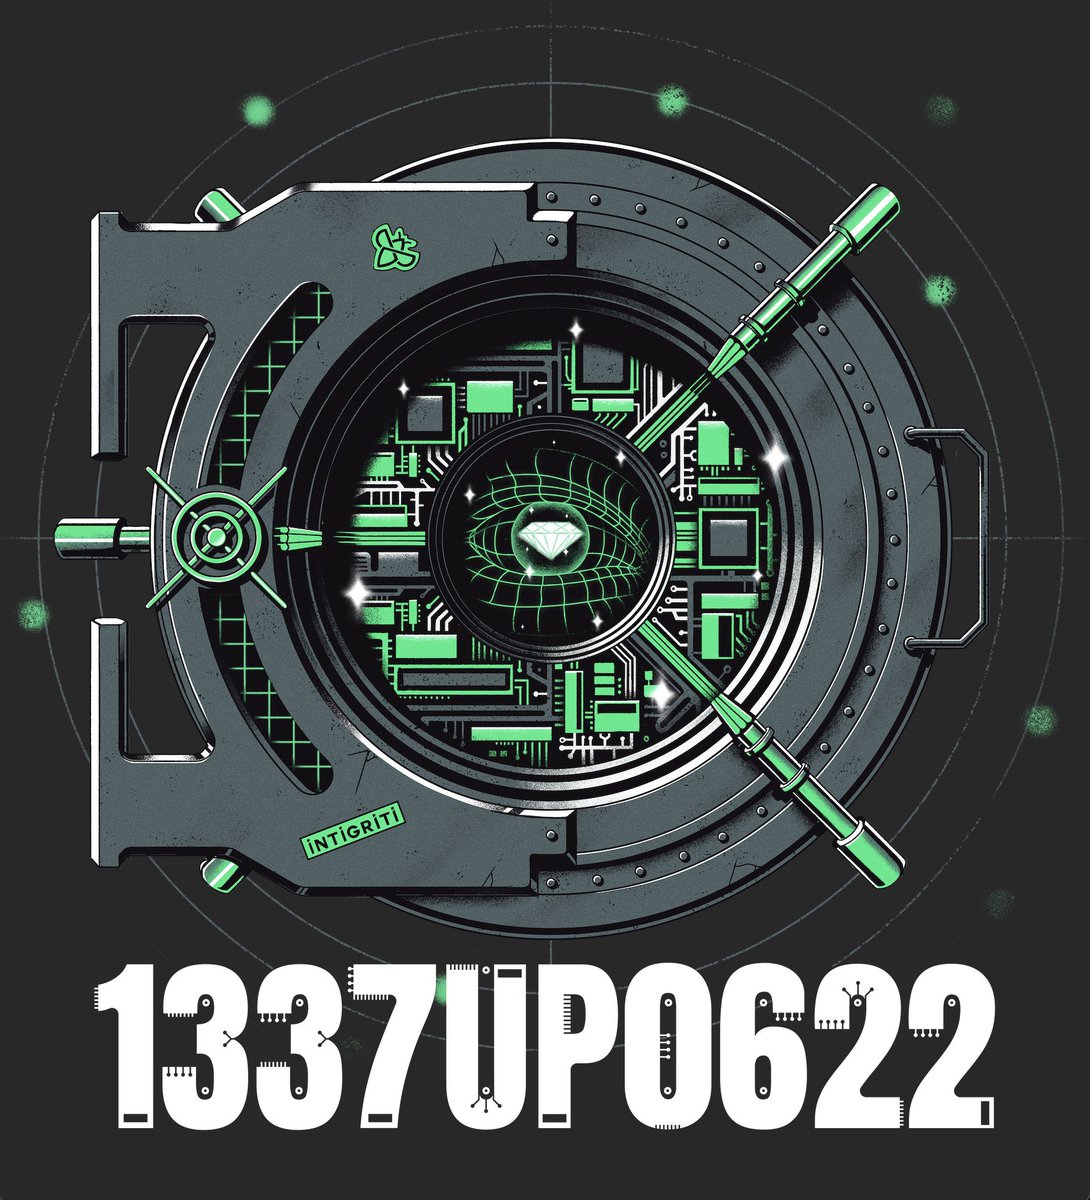 Looking forward to #1337UP0622 Live Hacking event @intigriti